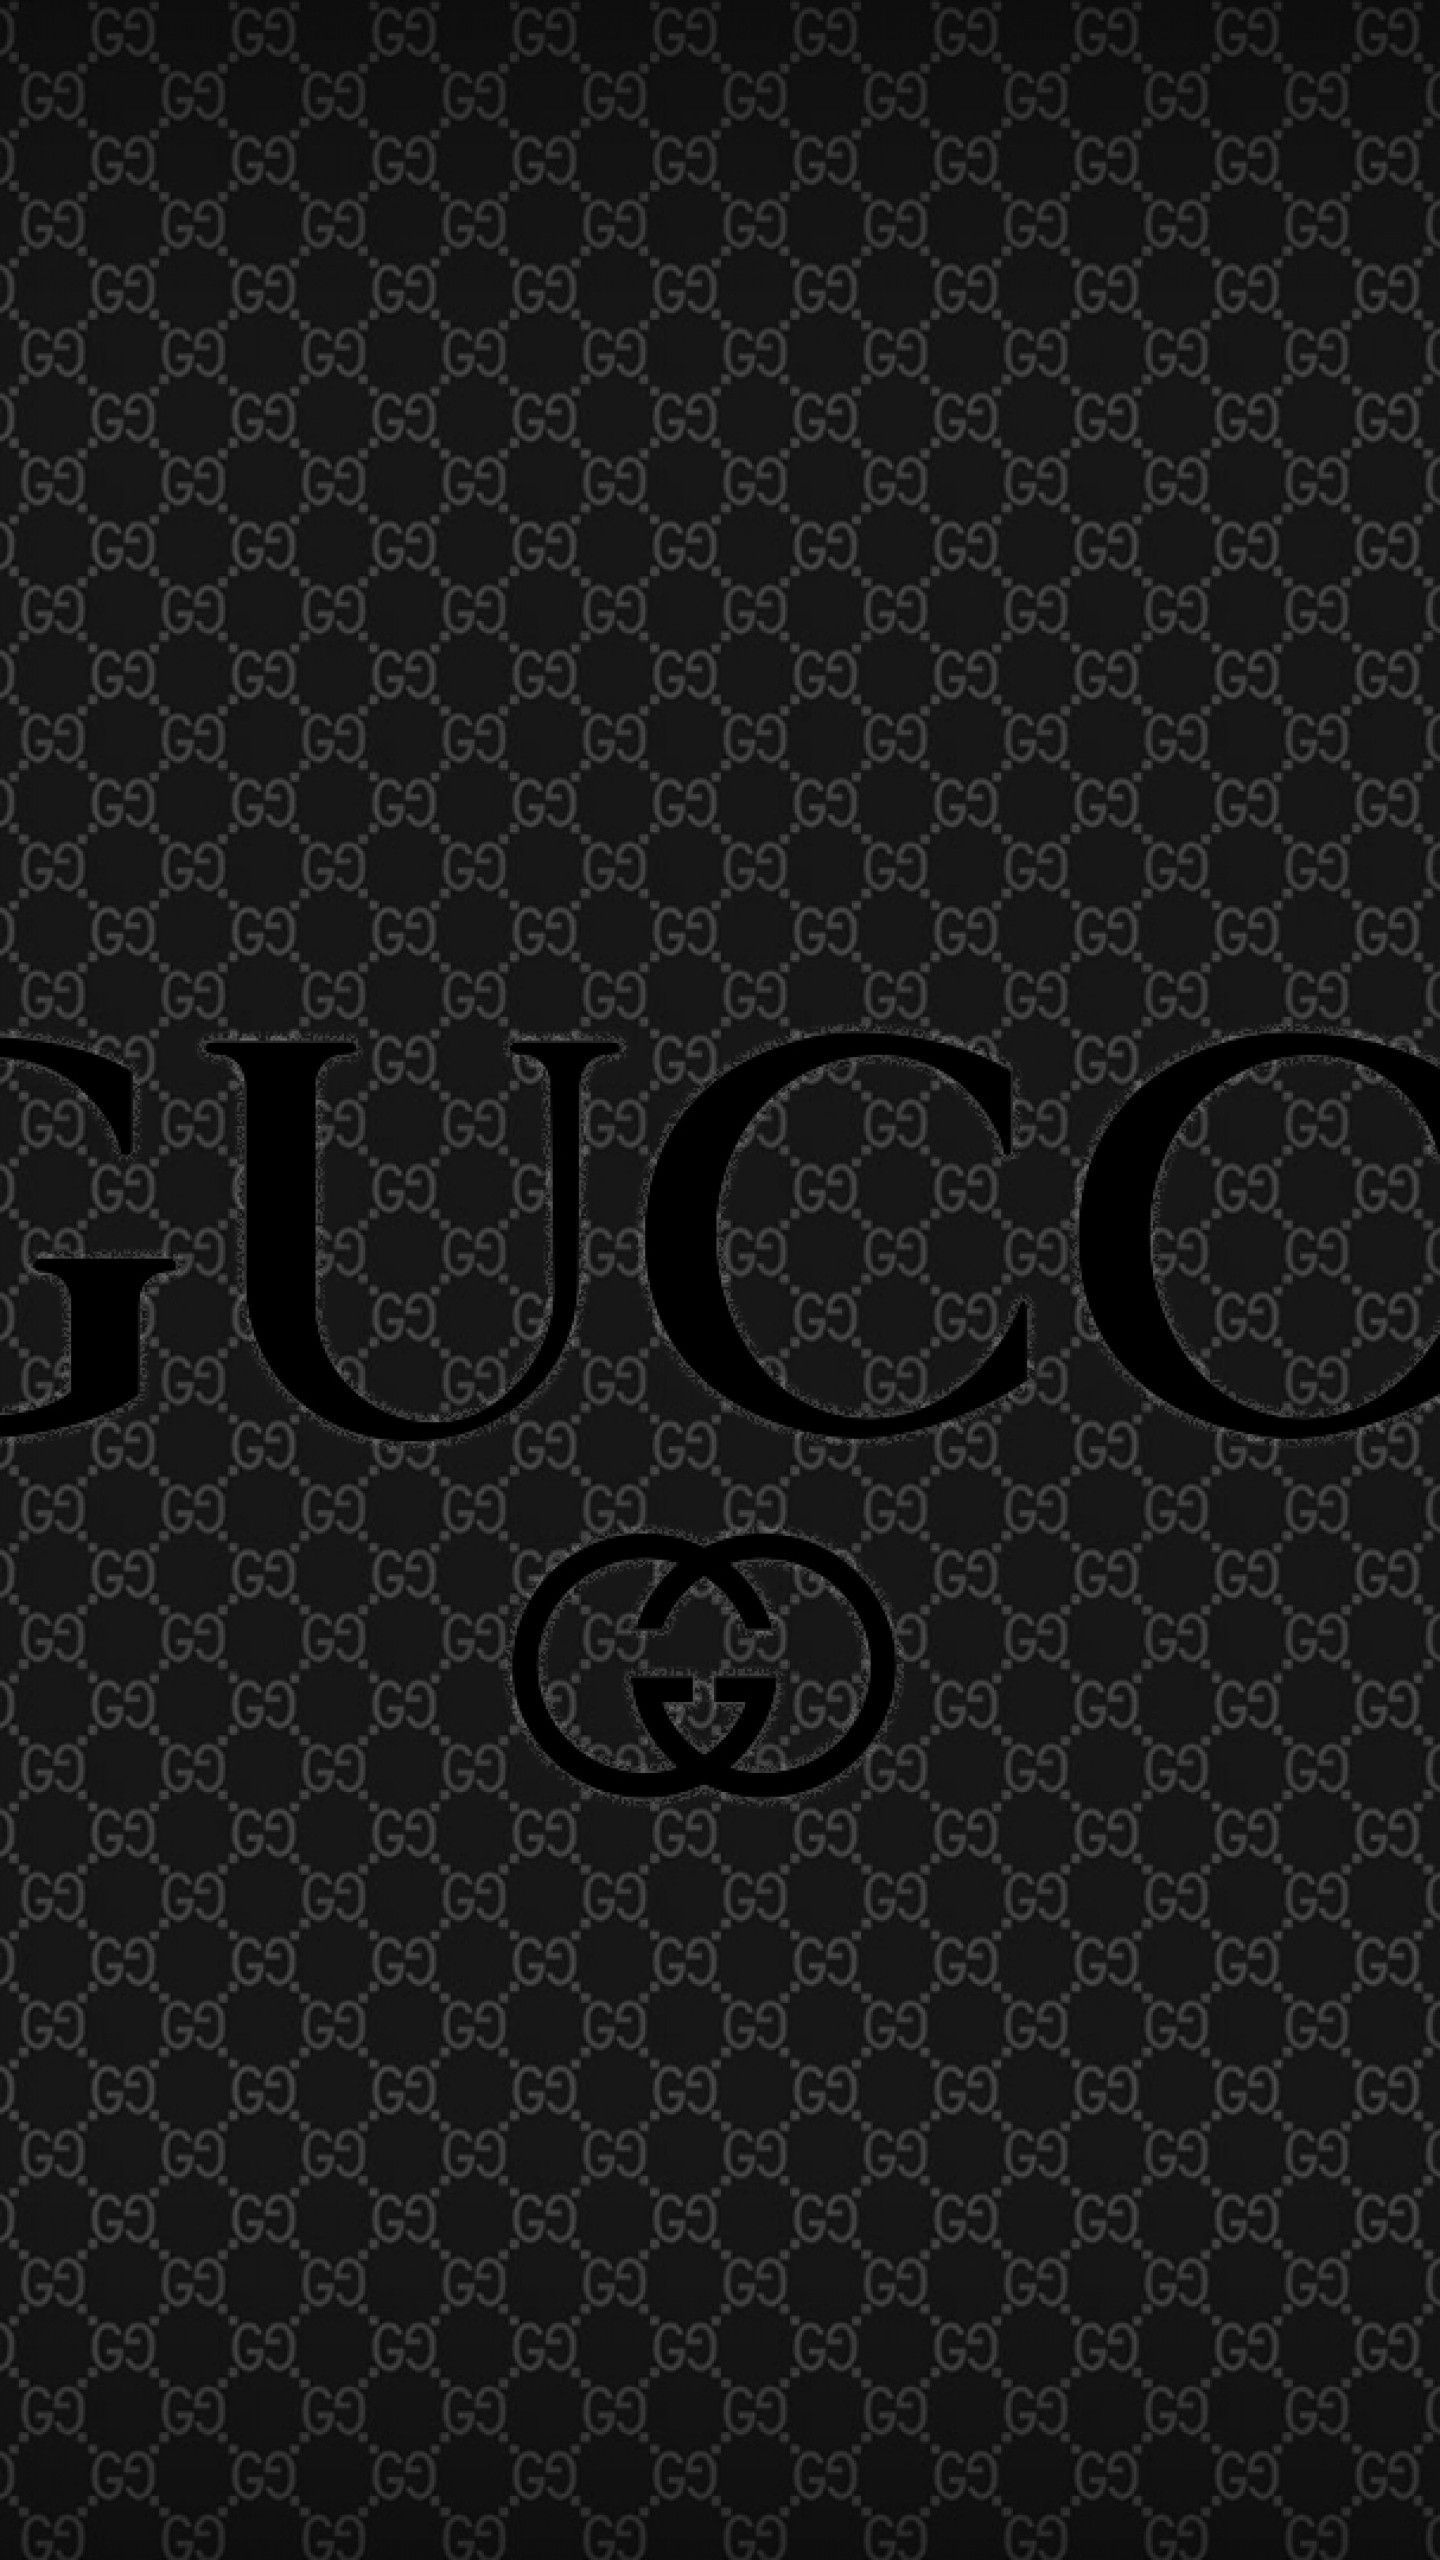 Gucci Wallpapers - Top Free Gucci Backgrounds - WallpaperAccess  Gucci  wallpaper iphone, Hypebeast wallpaper, Hypebeast iphone wallpaper